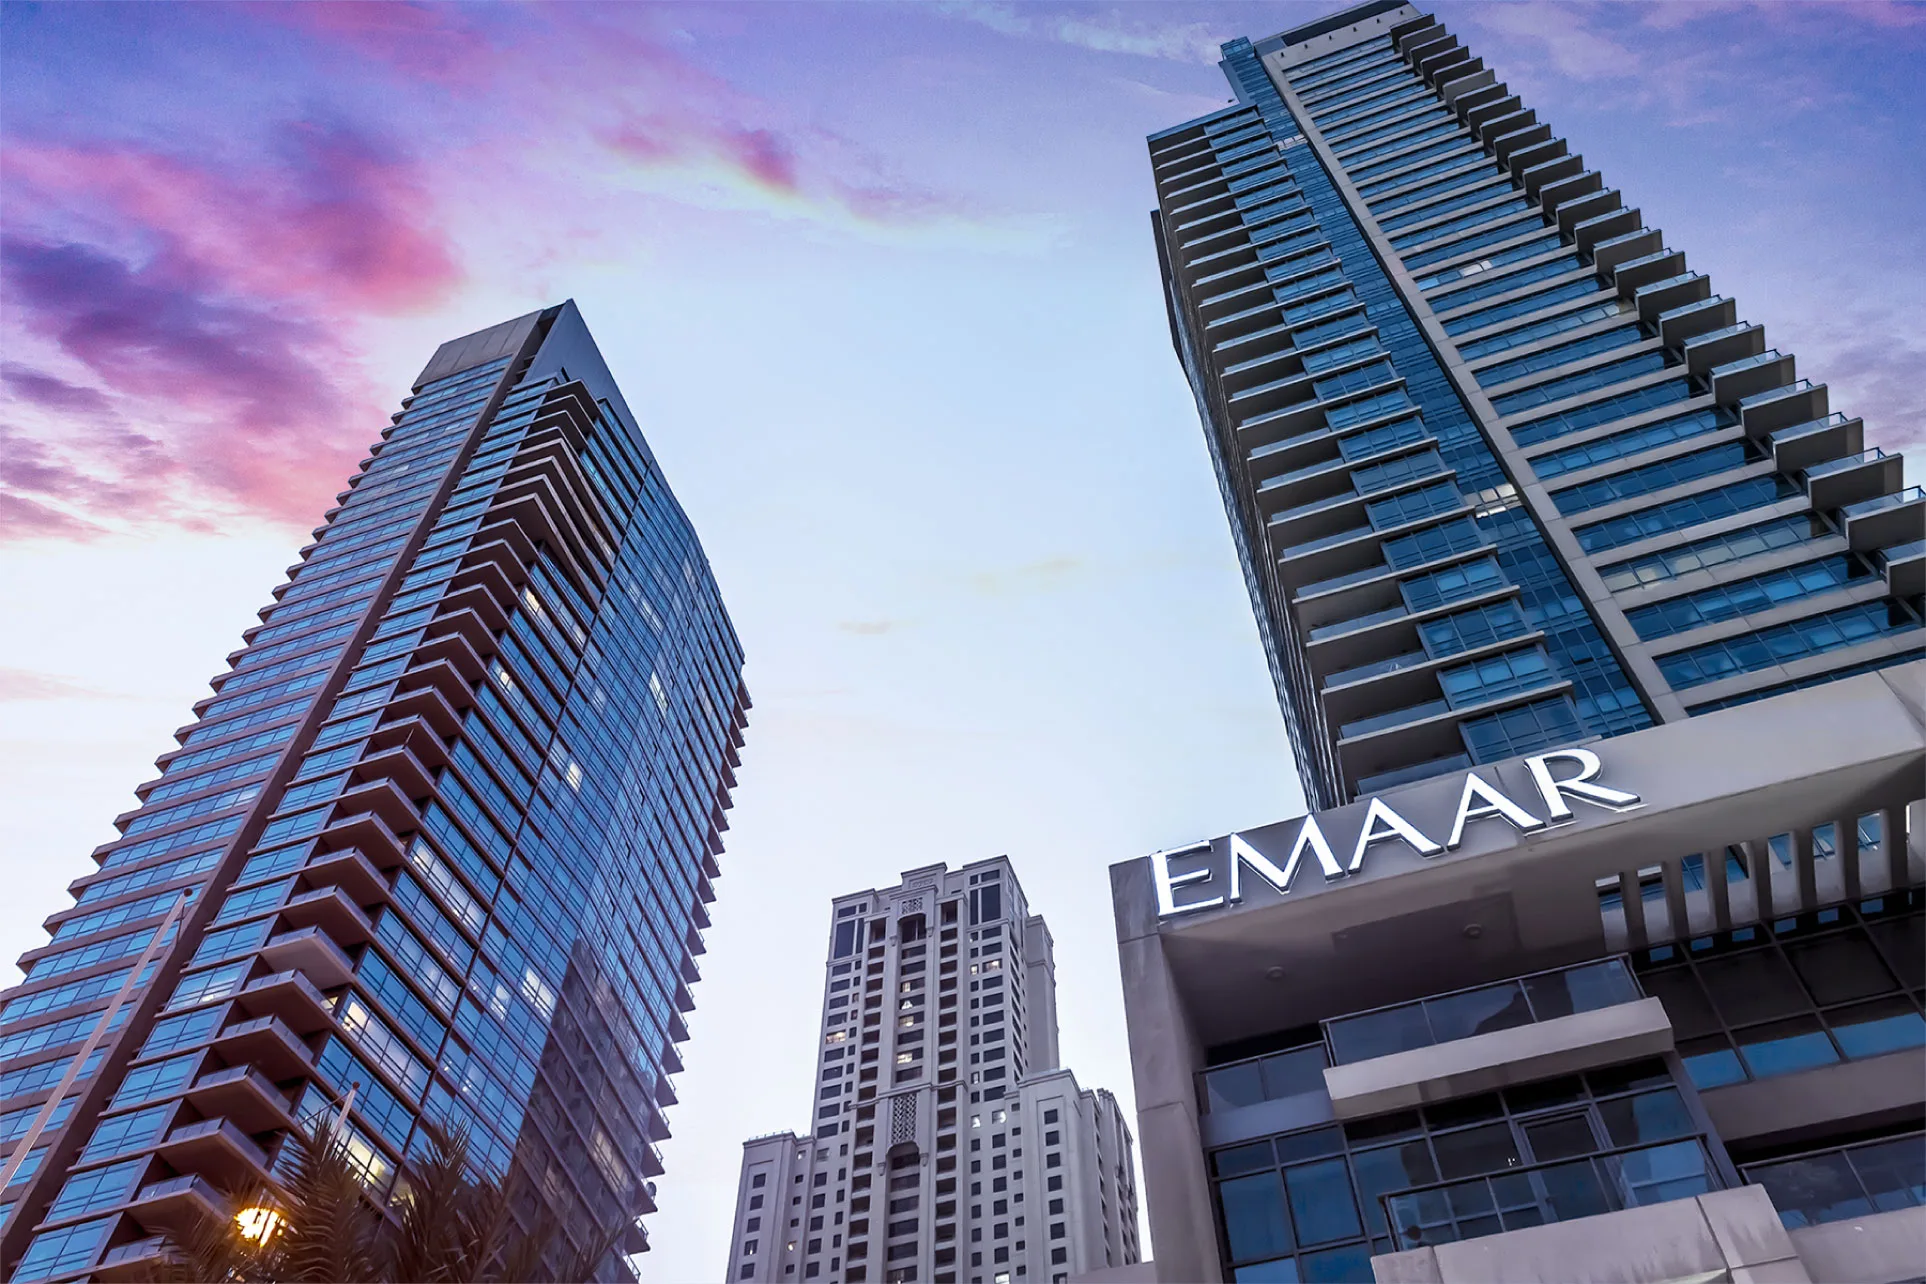 Dubai’s Emaar Properties launches two luxury residential projects, costing Dh96b